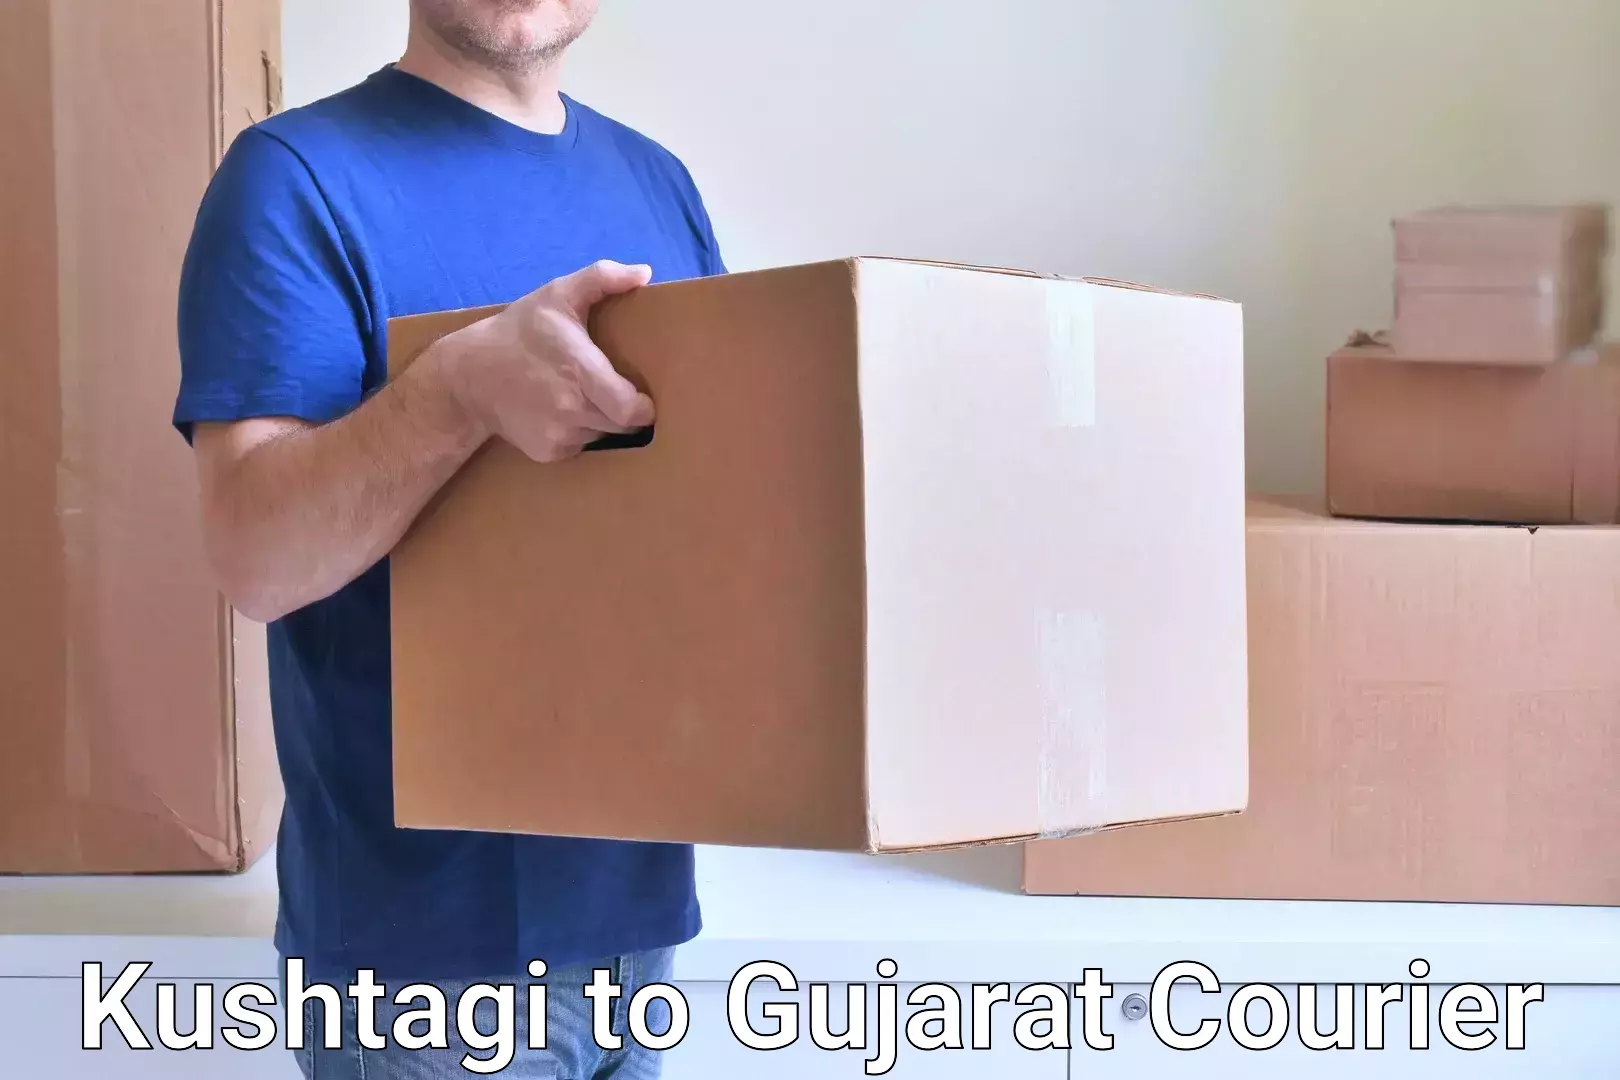 Flexible delivery schedules Kushtagi to Ahmedabad